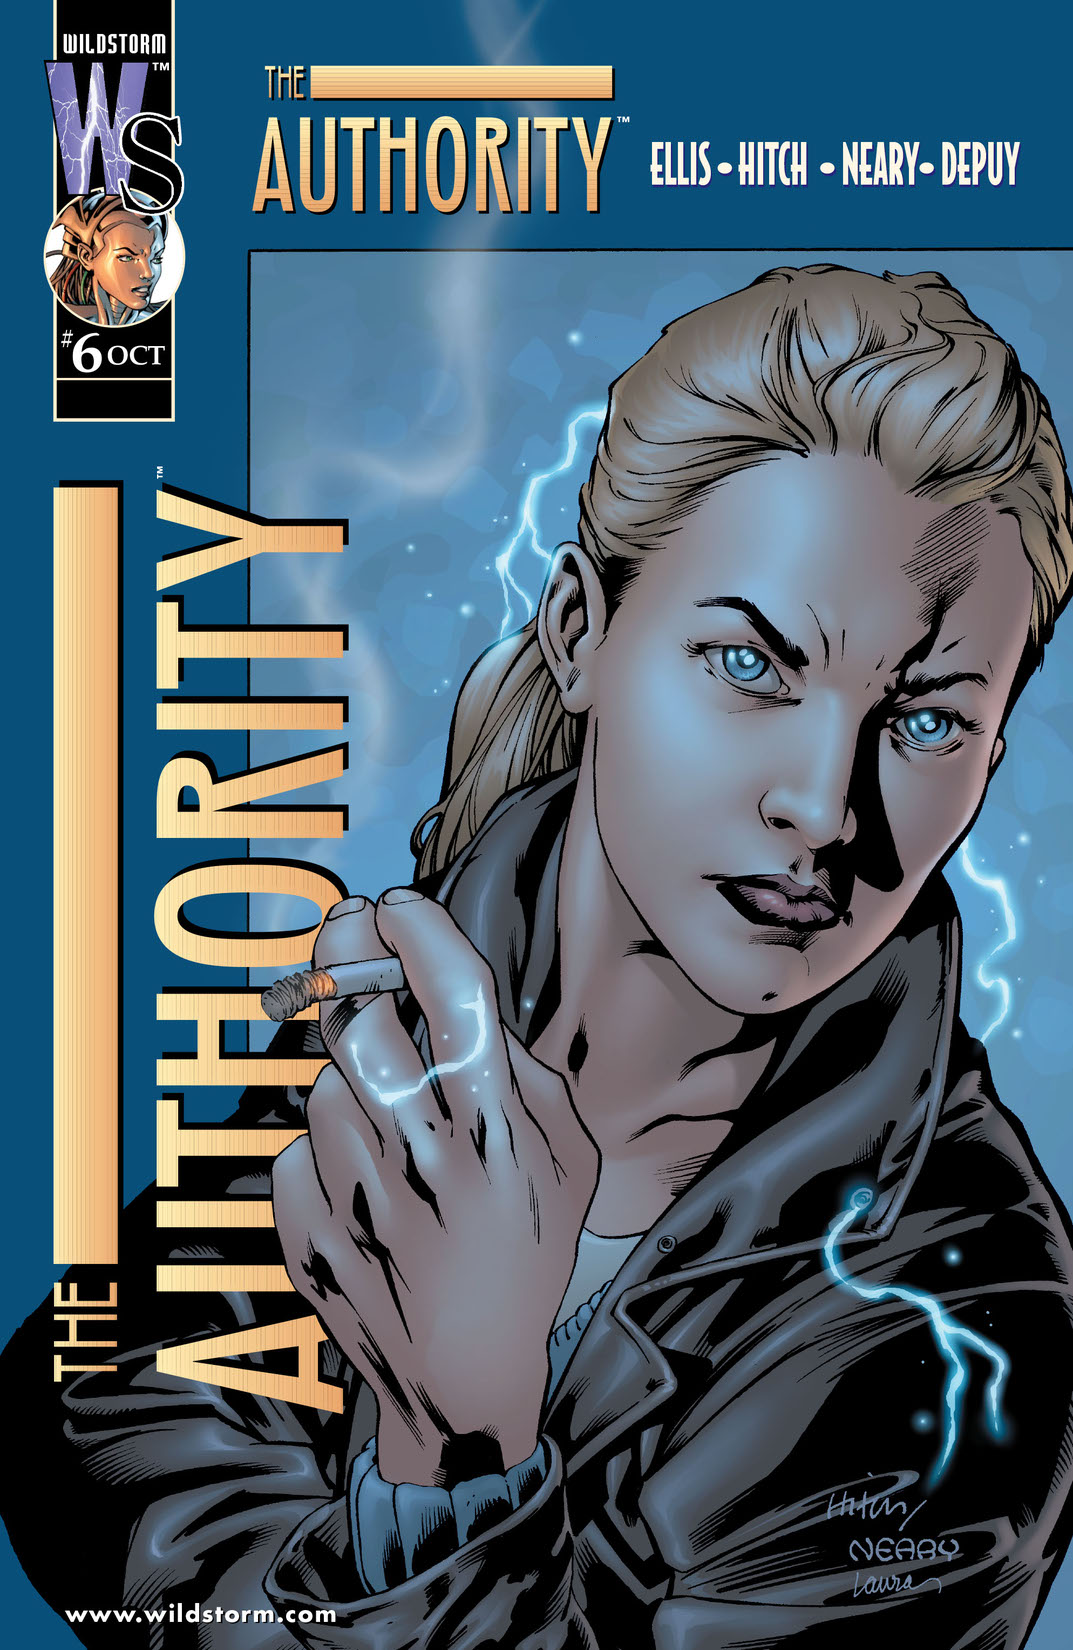 The Authority (1999-) #6 preview images